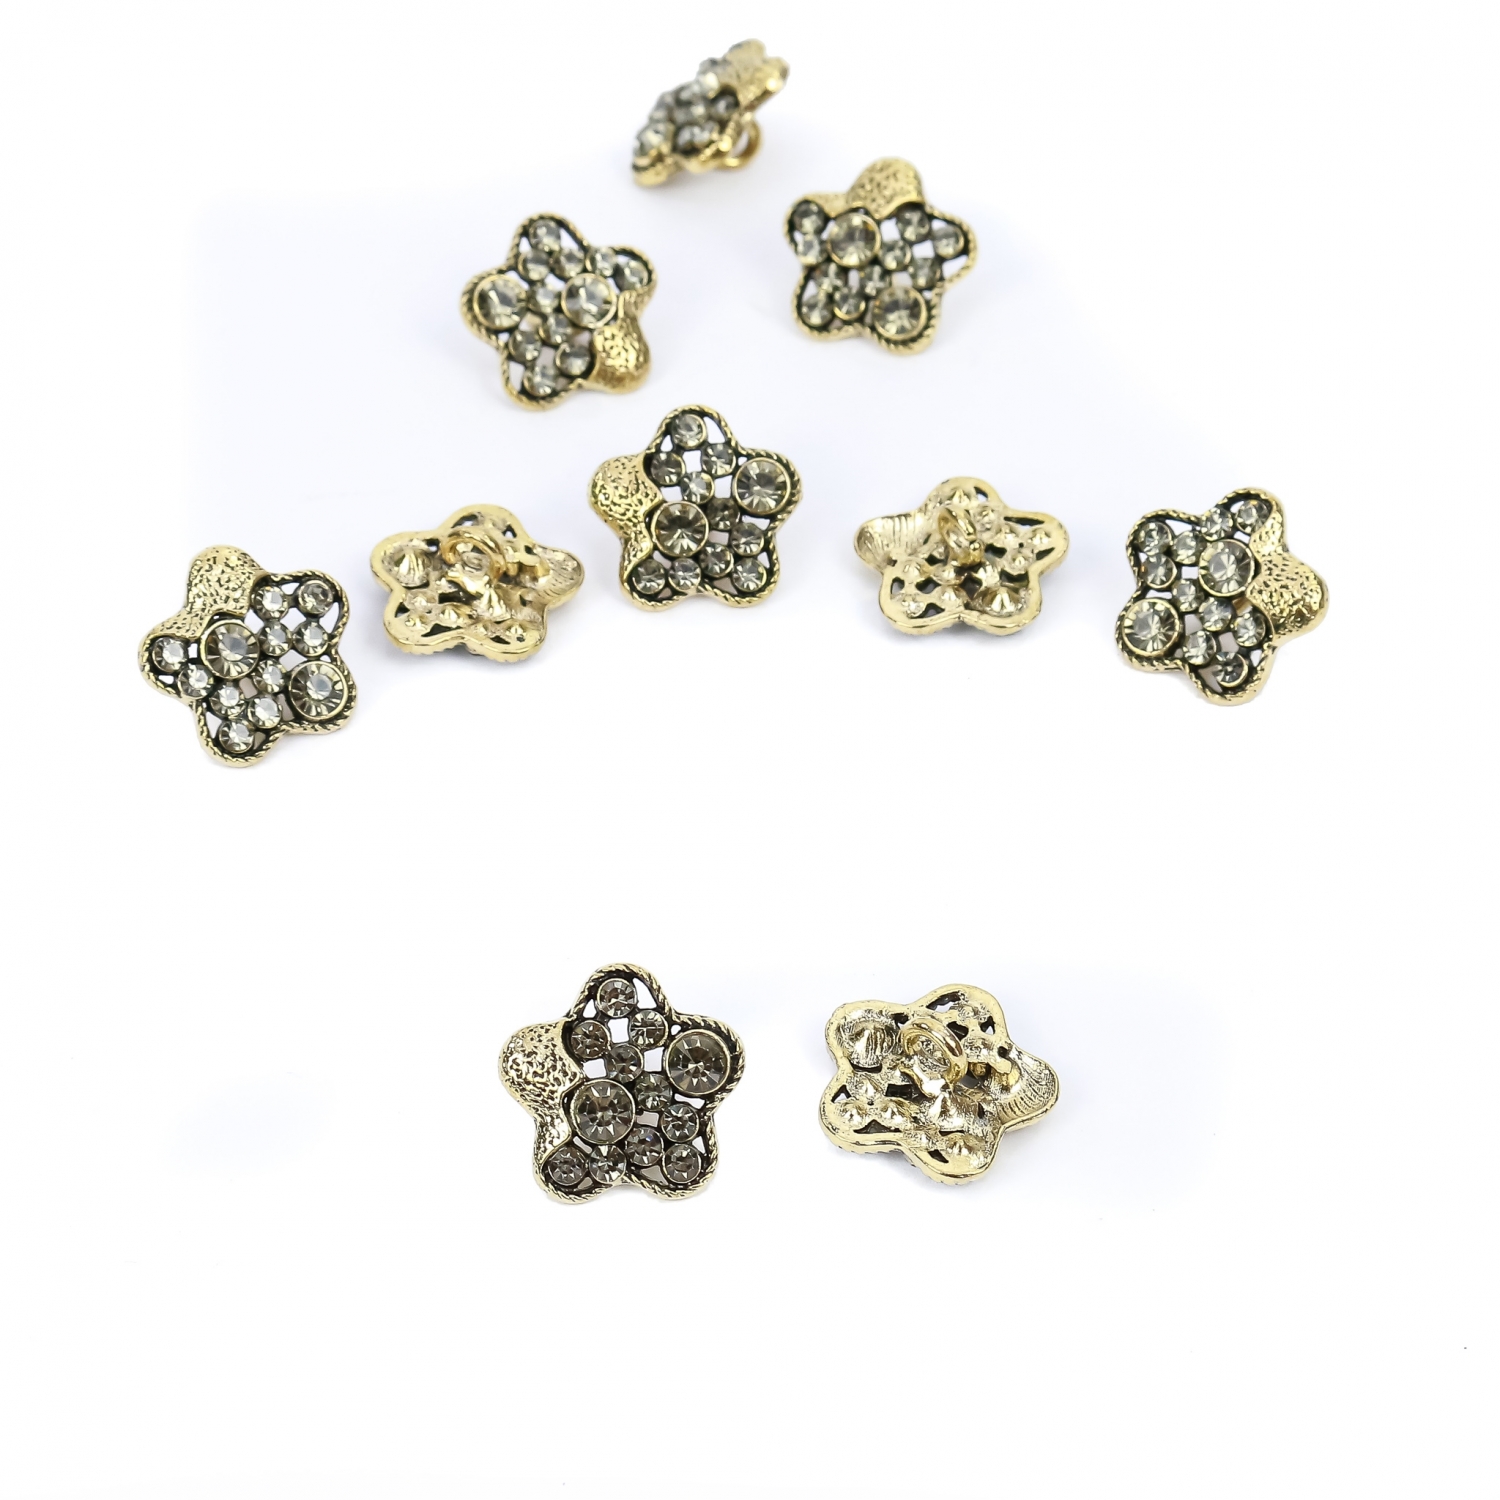 Shank Buttons with Rhinestones, Size 21 mm (10 pcs/pack) Code: BT1356